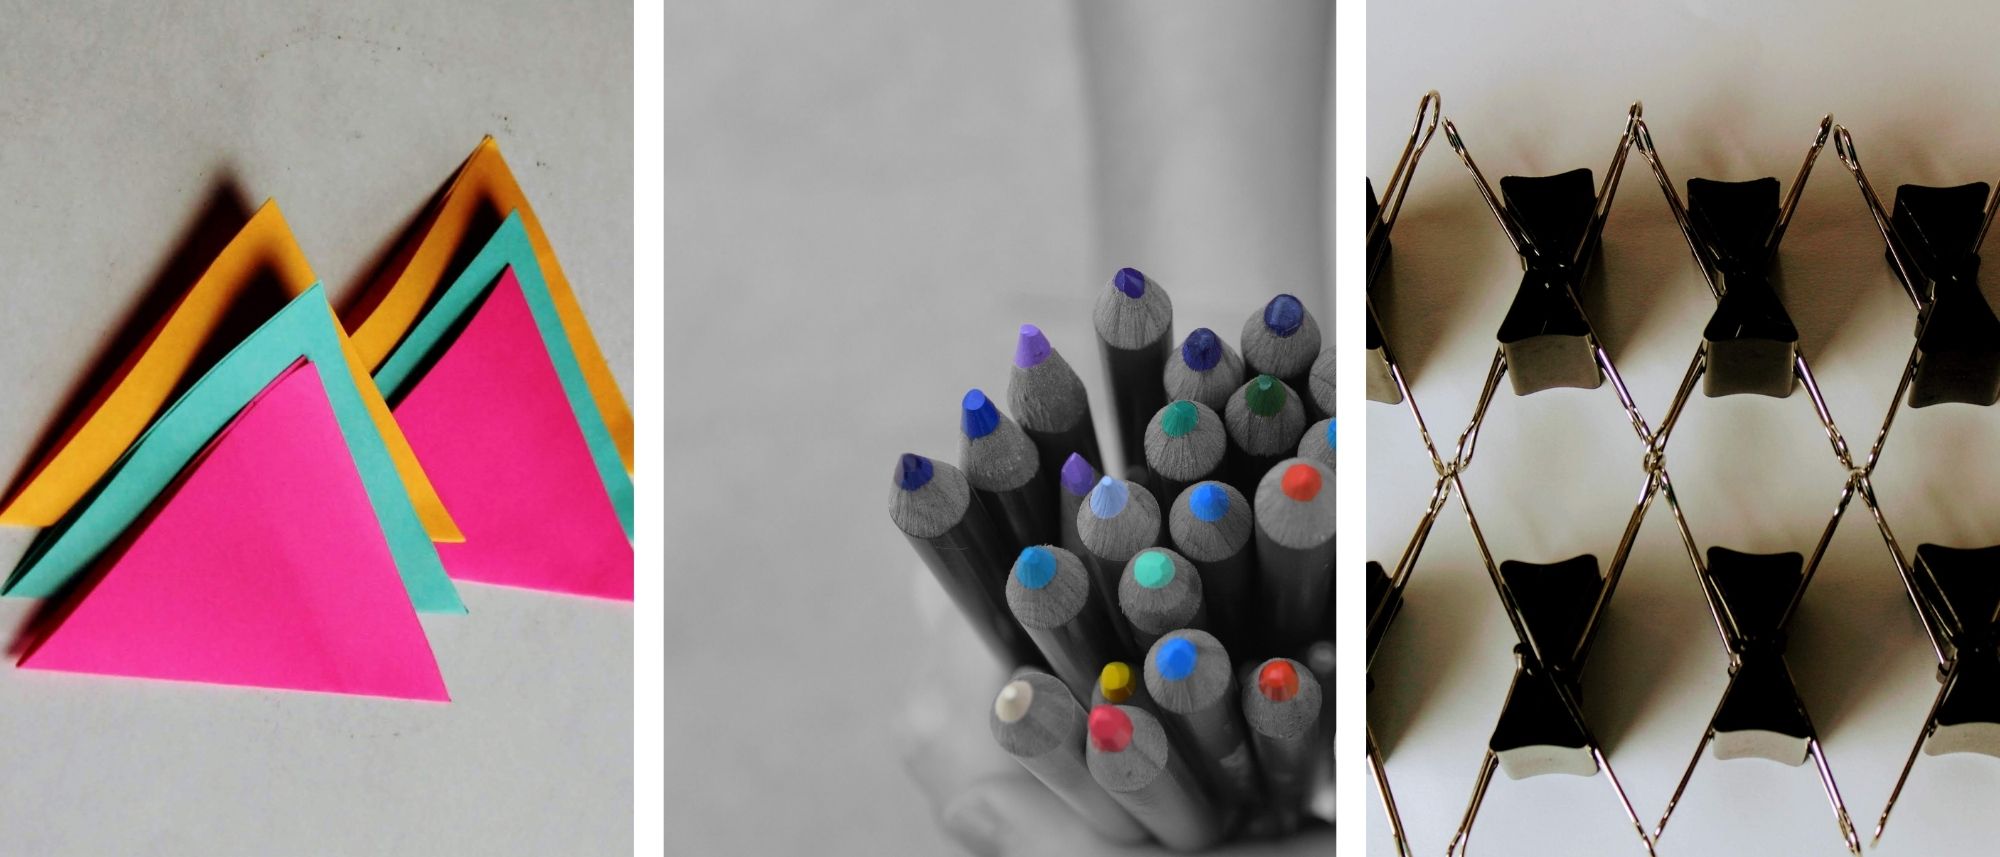 Schools of Choice collage Banner - Triangle pieces of paper, girl holding colored pencils and binders stacked together in a zig zag pattern